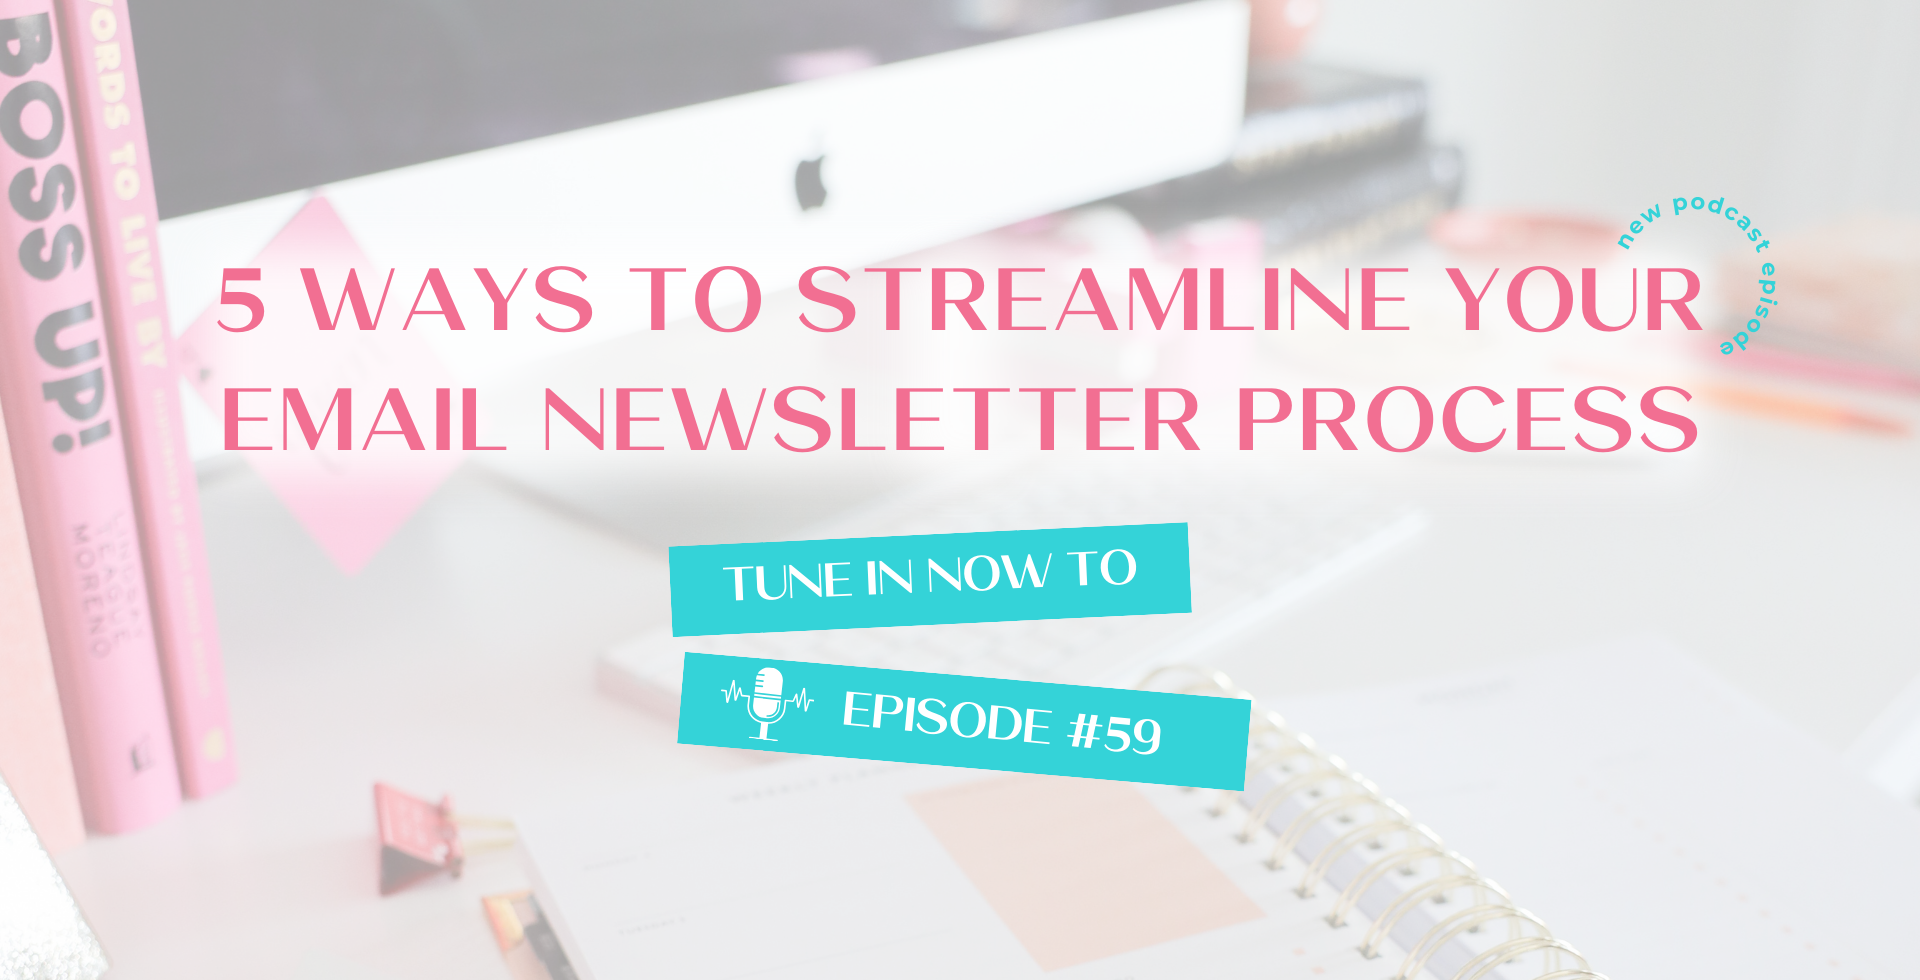 Podcast Episode 59: 5 Ways to Streamline Your Email Newsletter Process